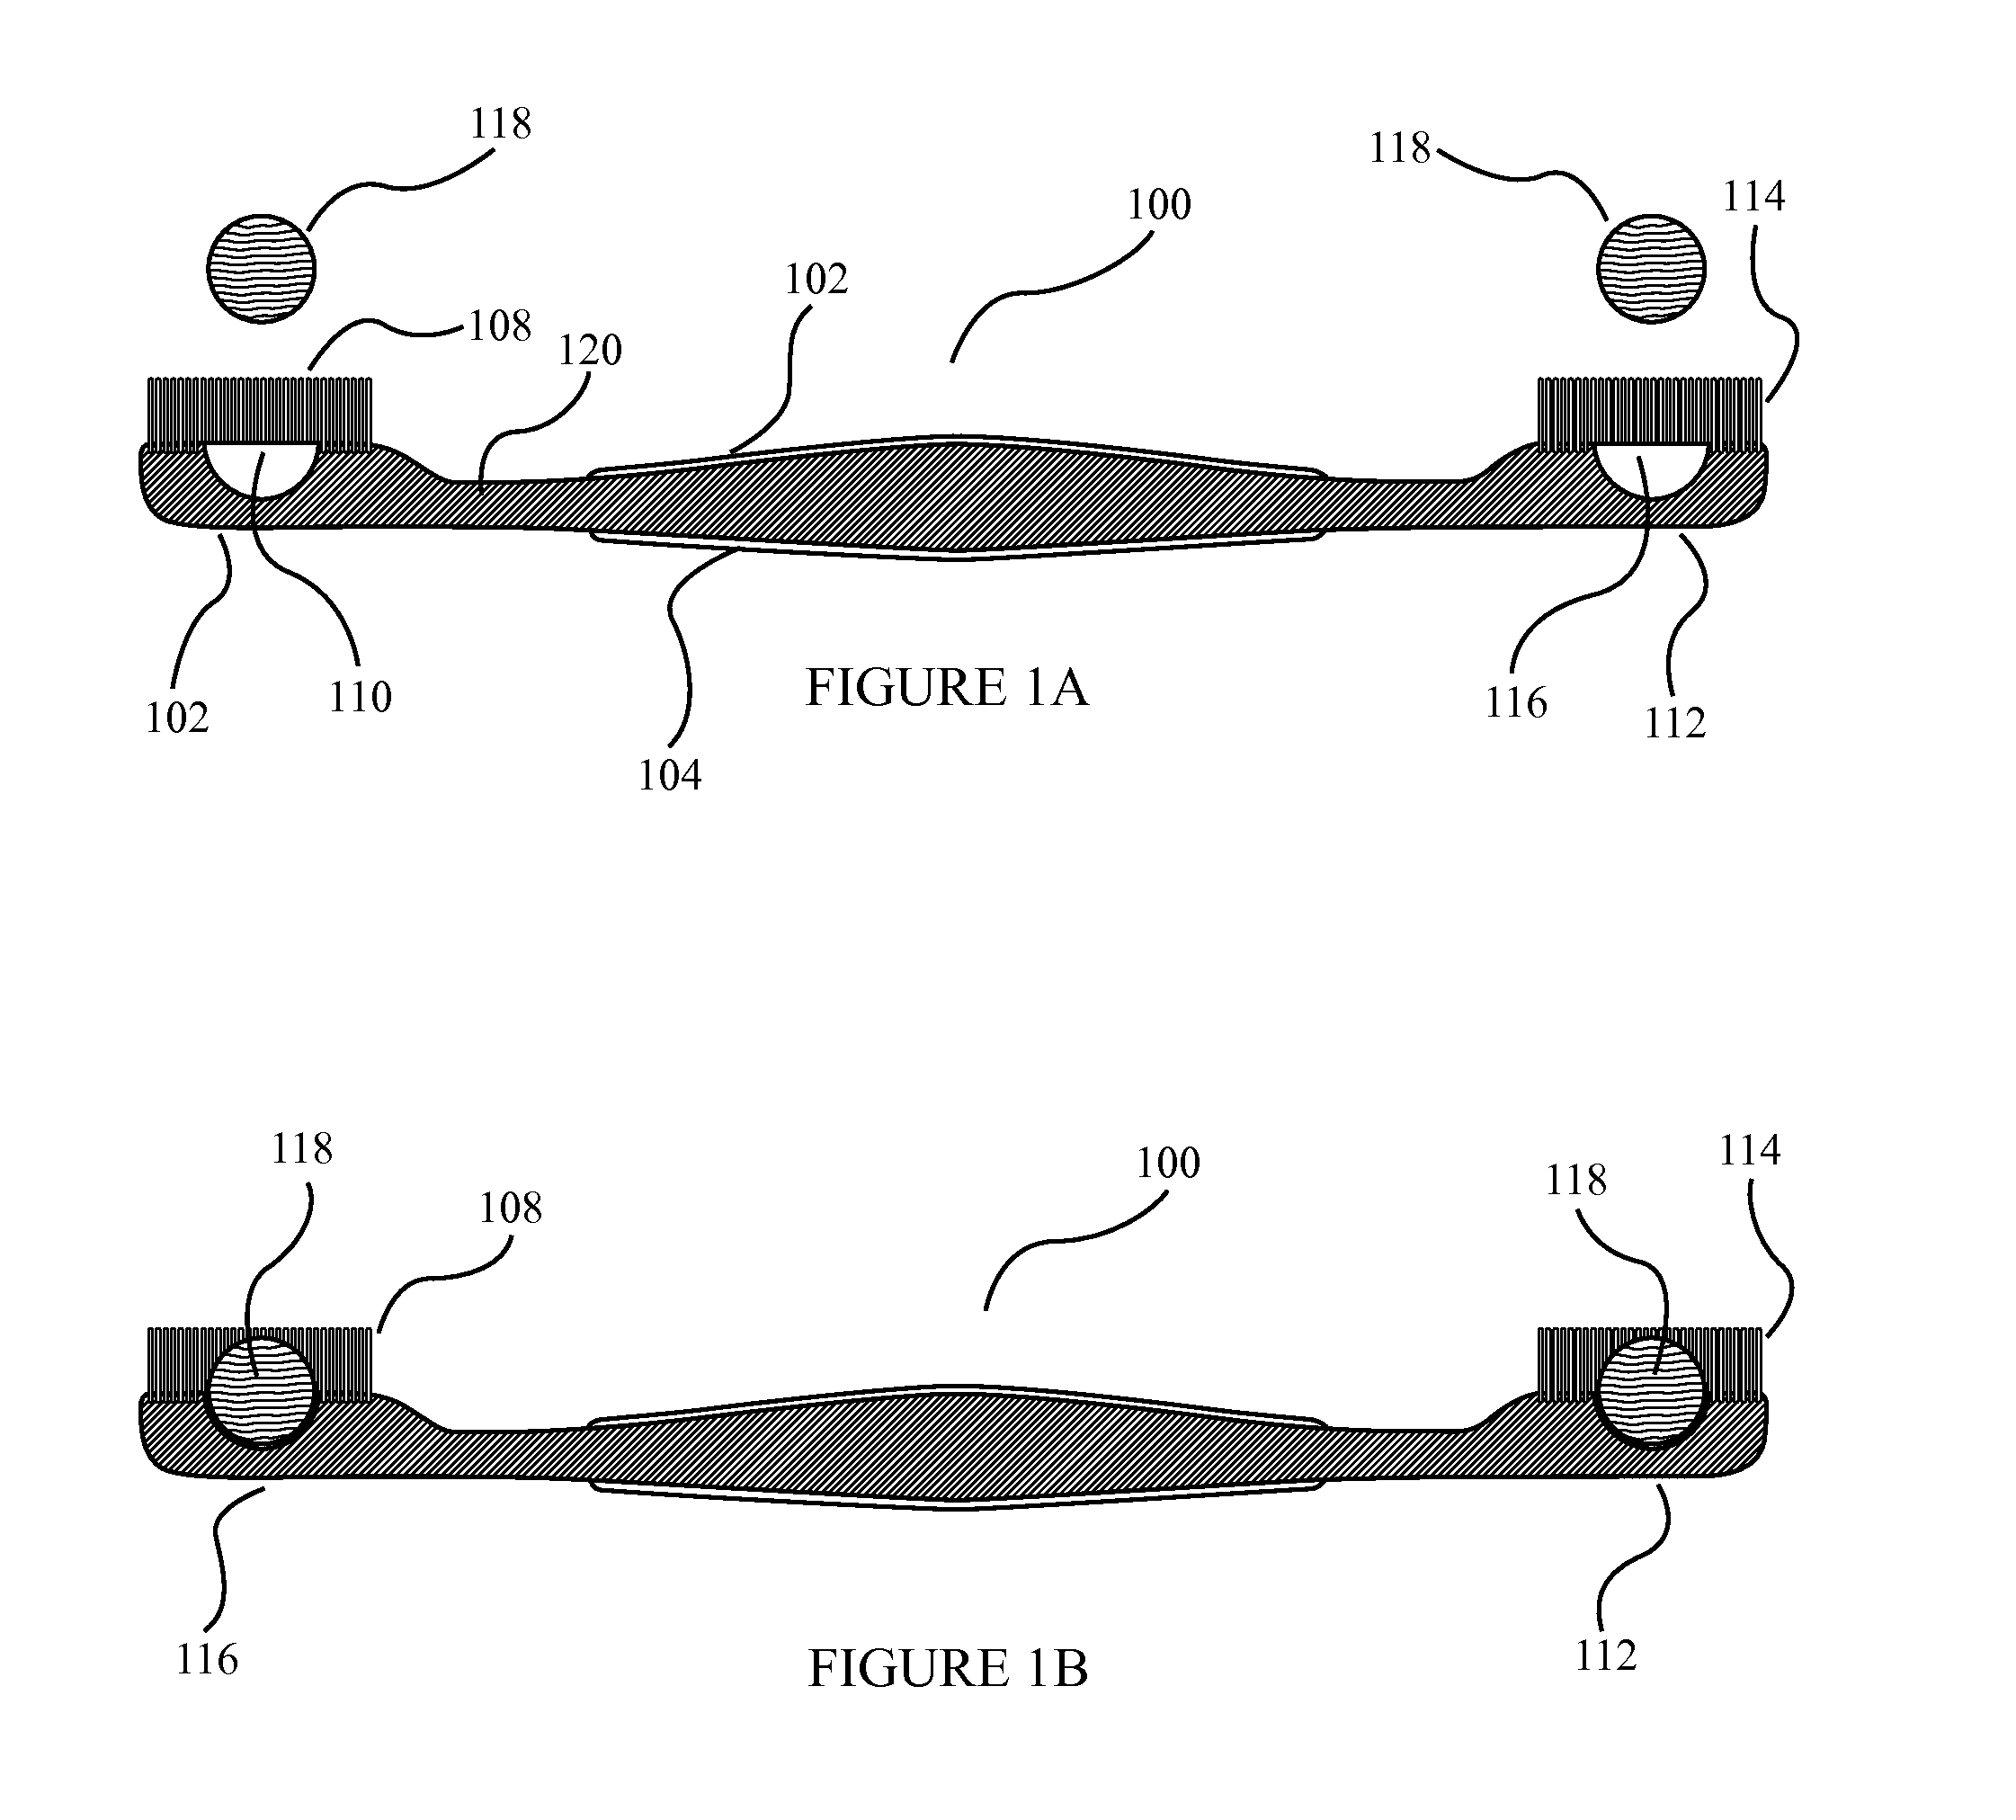 Oral hygiene implement and method of use